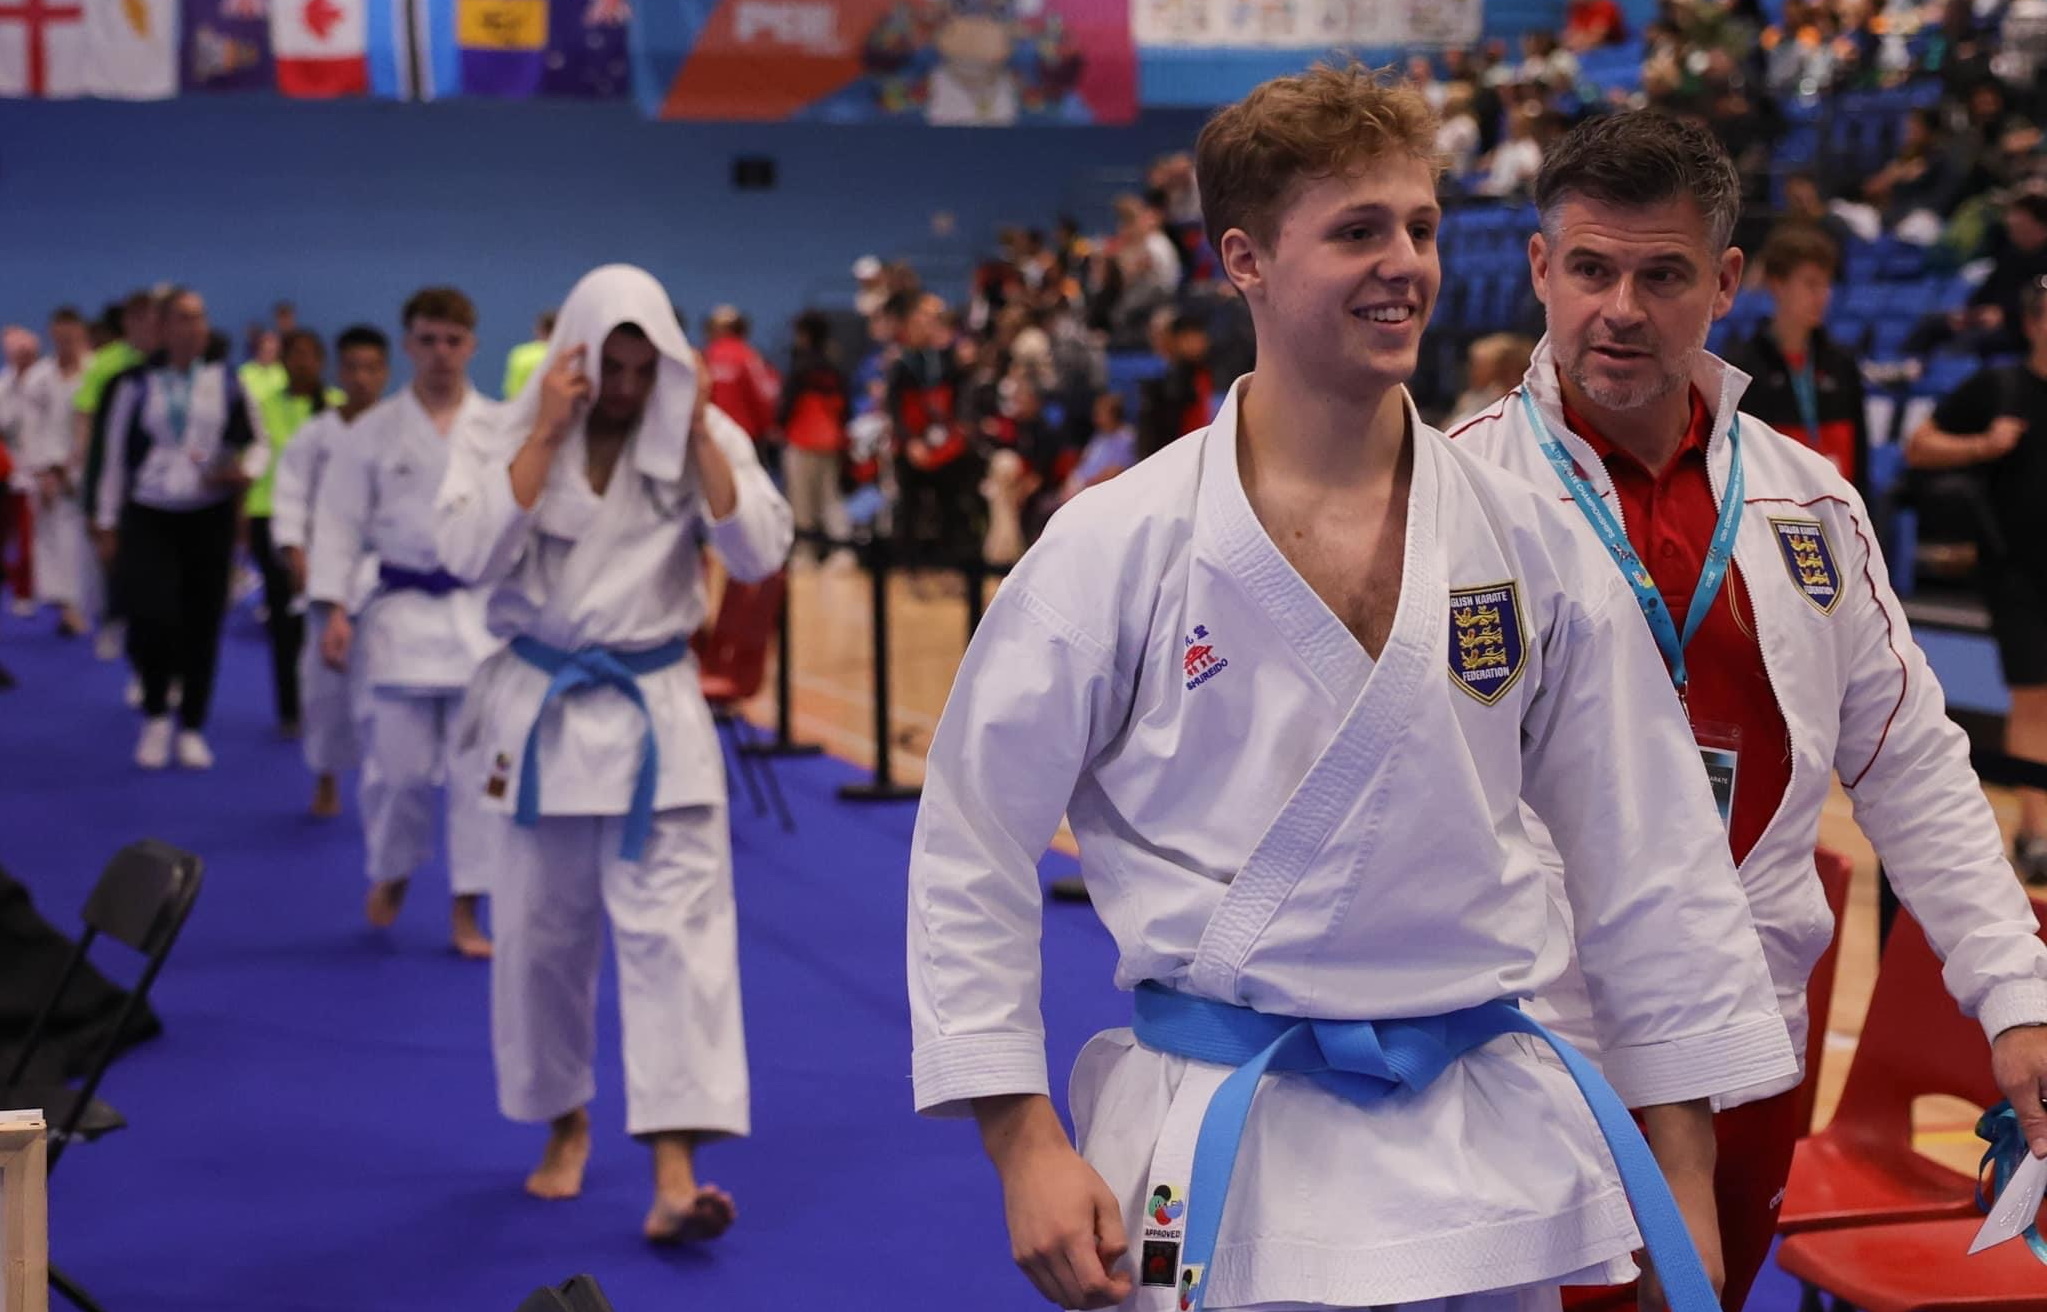 Coach walking into the sports hall during a competition talking to a karate student wearing a blue belt